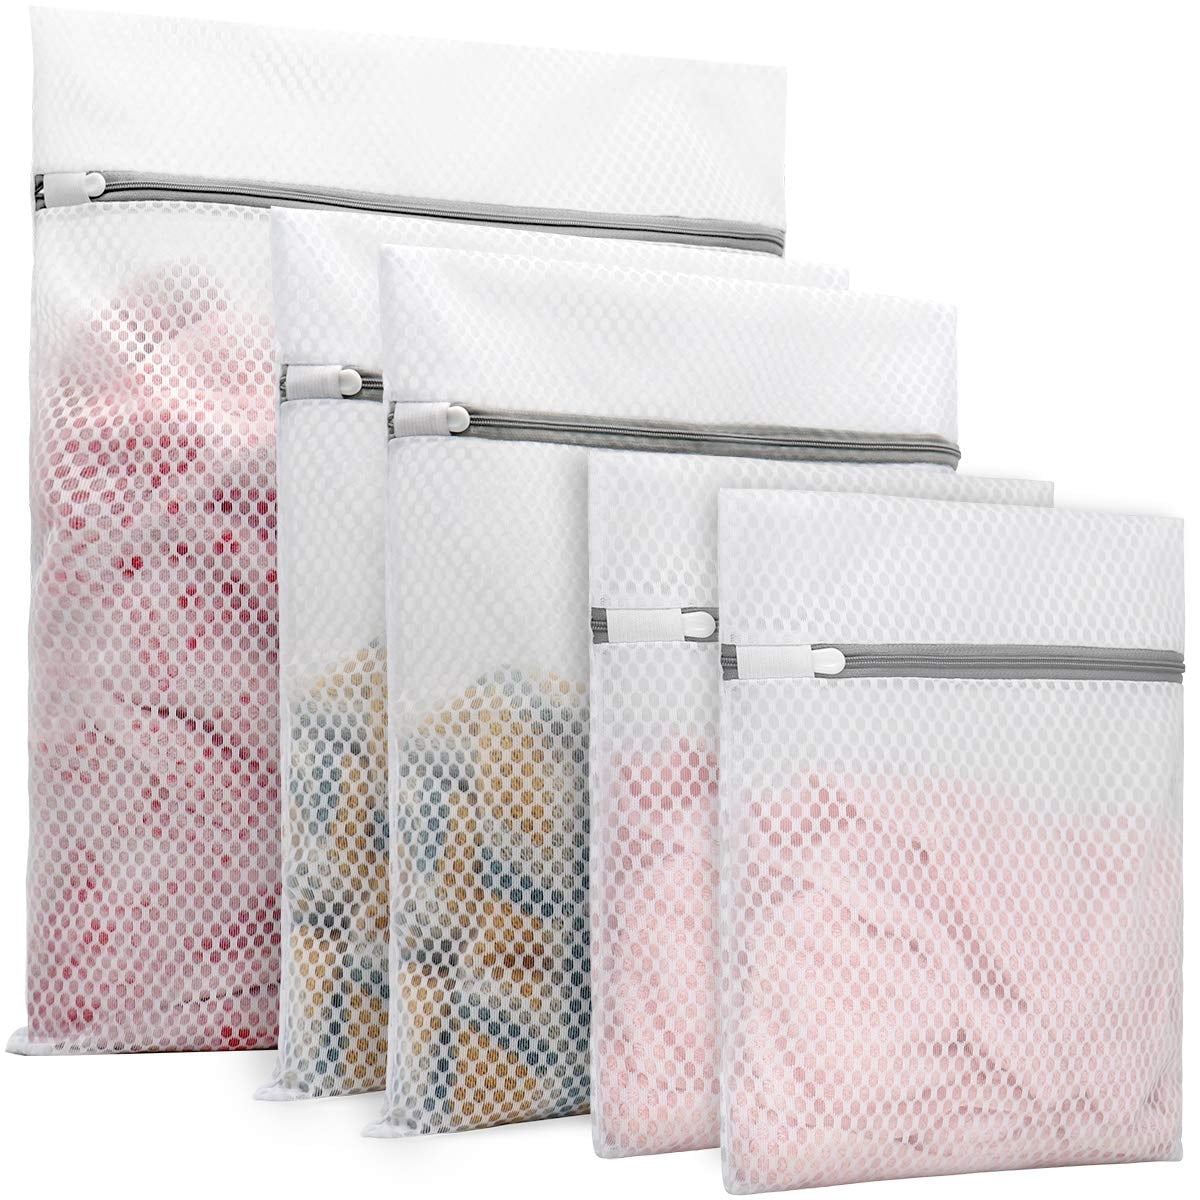 5Pack Laundry Mesh Bags Delicates Wash Bags for Lingerie Stockings - (1 ...